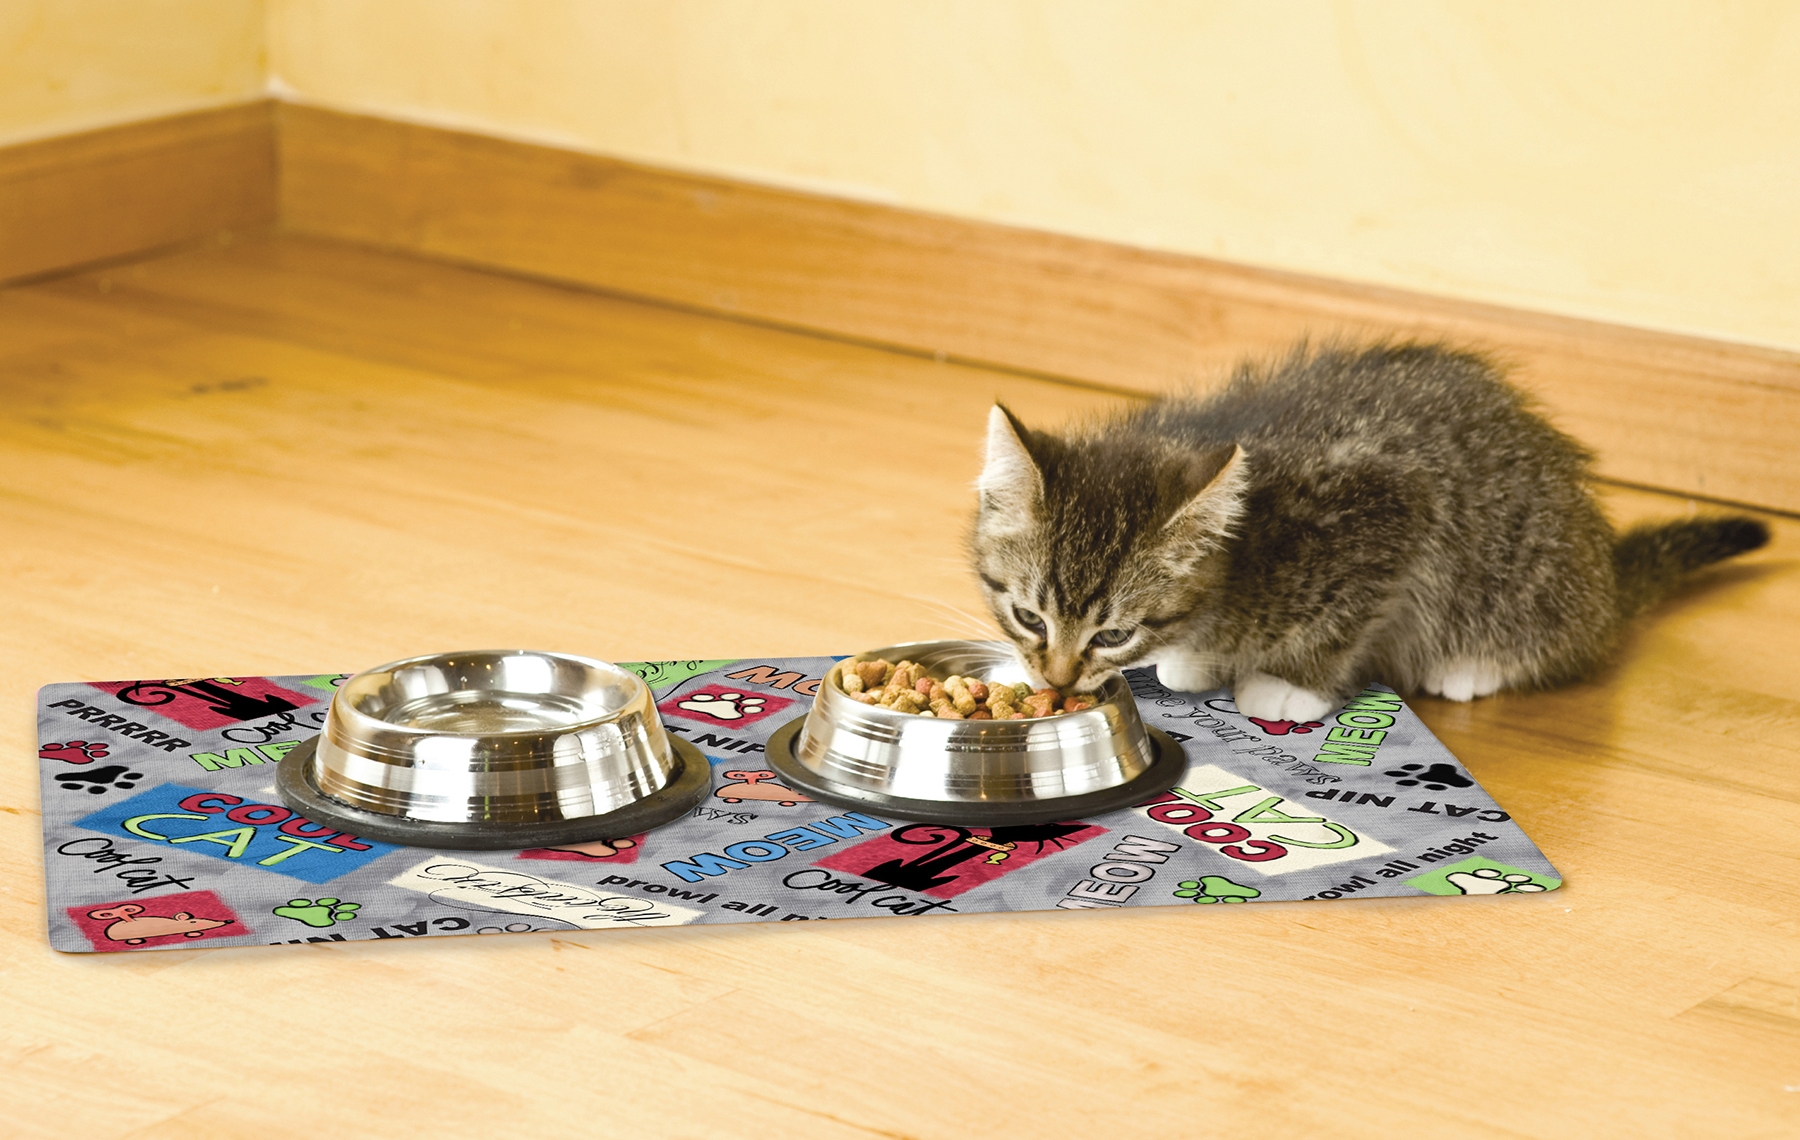 https://www.ecodogsandcats.com/wp-content/uploads/2019/10/cpm1220ycc_cool_cat_grey_placemat_in_use.jpg